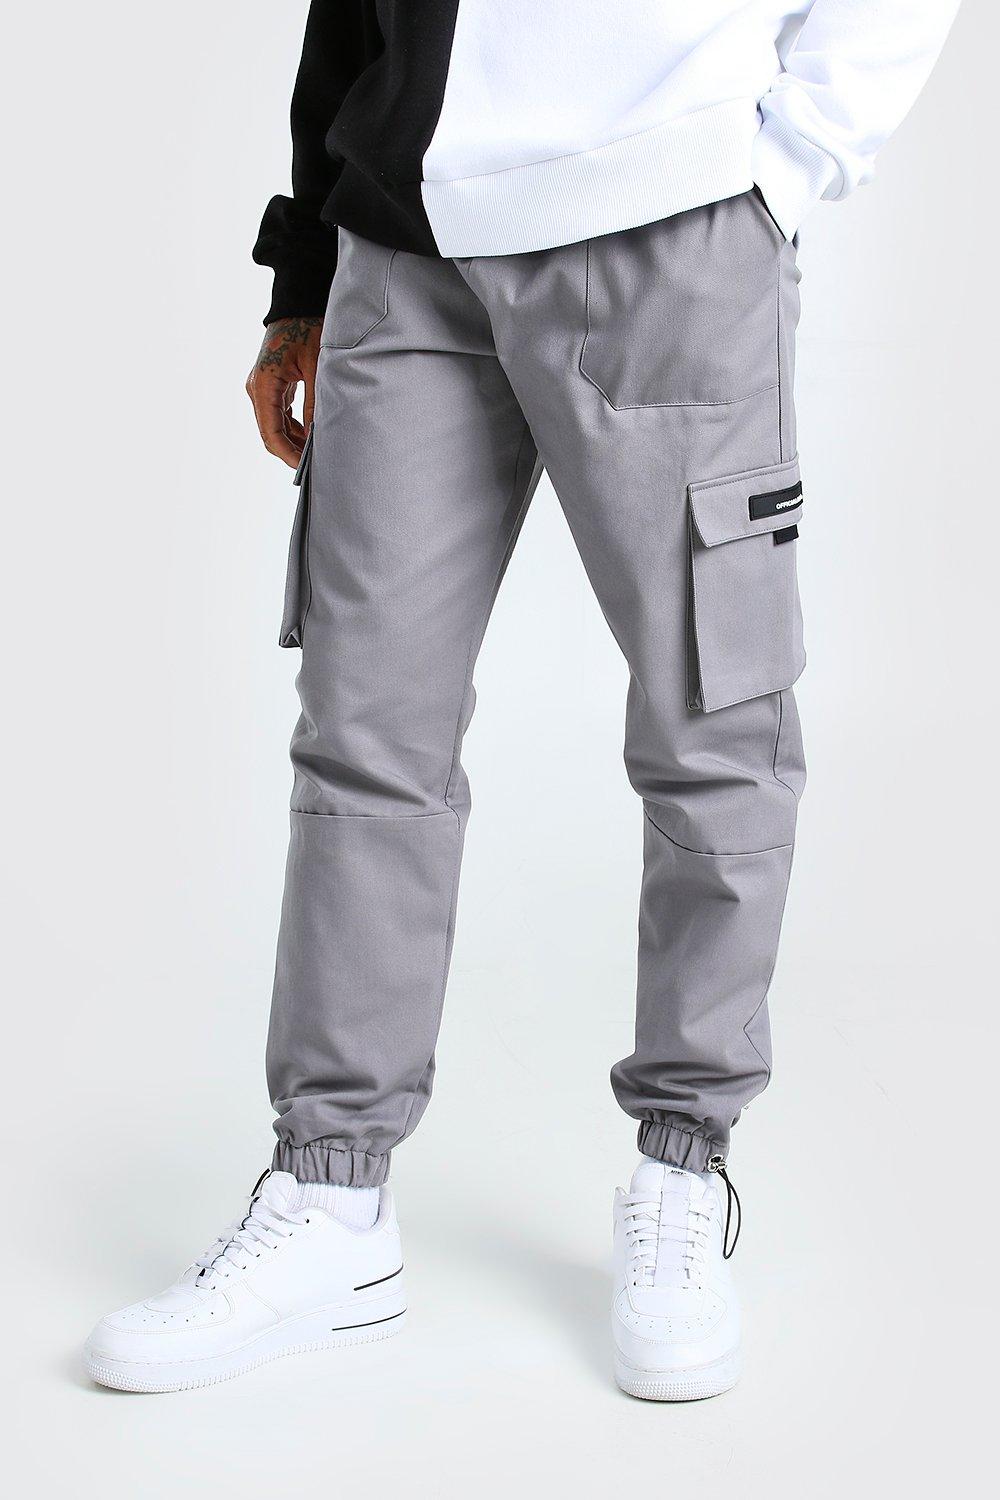 BoohooMAN for Mens Twill Cargo Pants With Rubber Tab Detail - Grey |  AccuWeather Shop